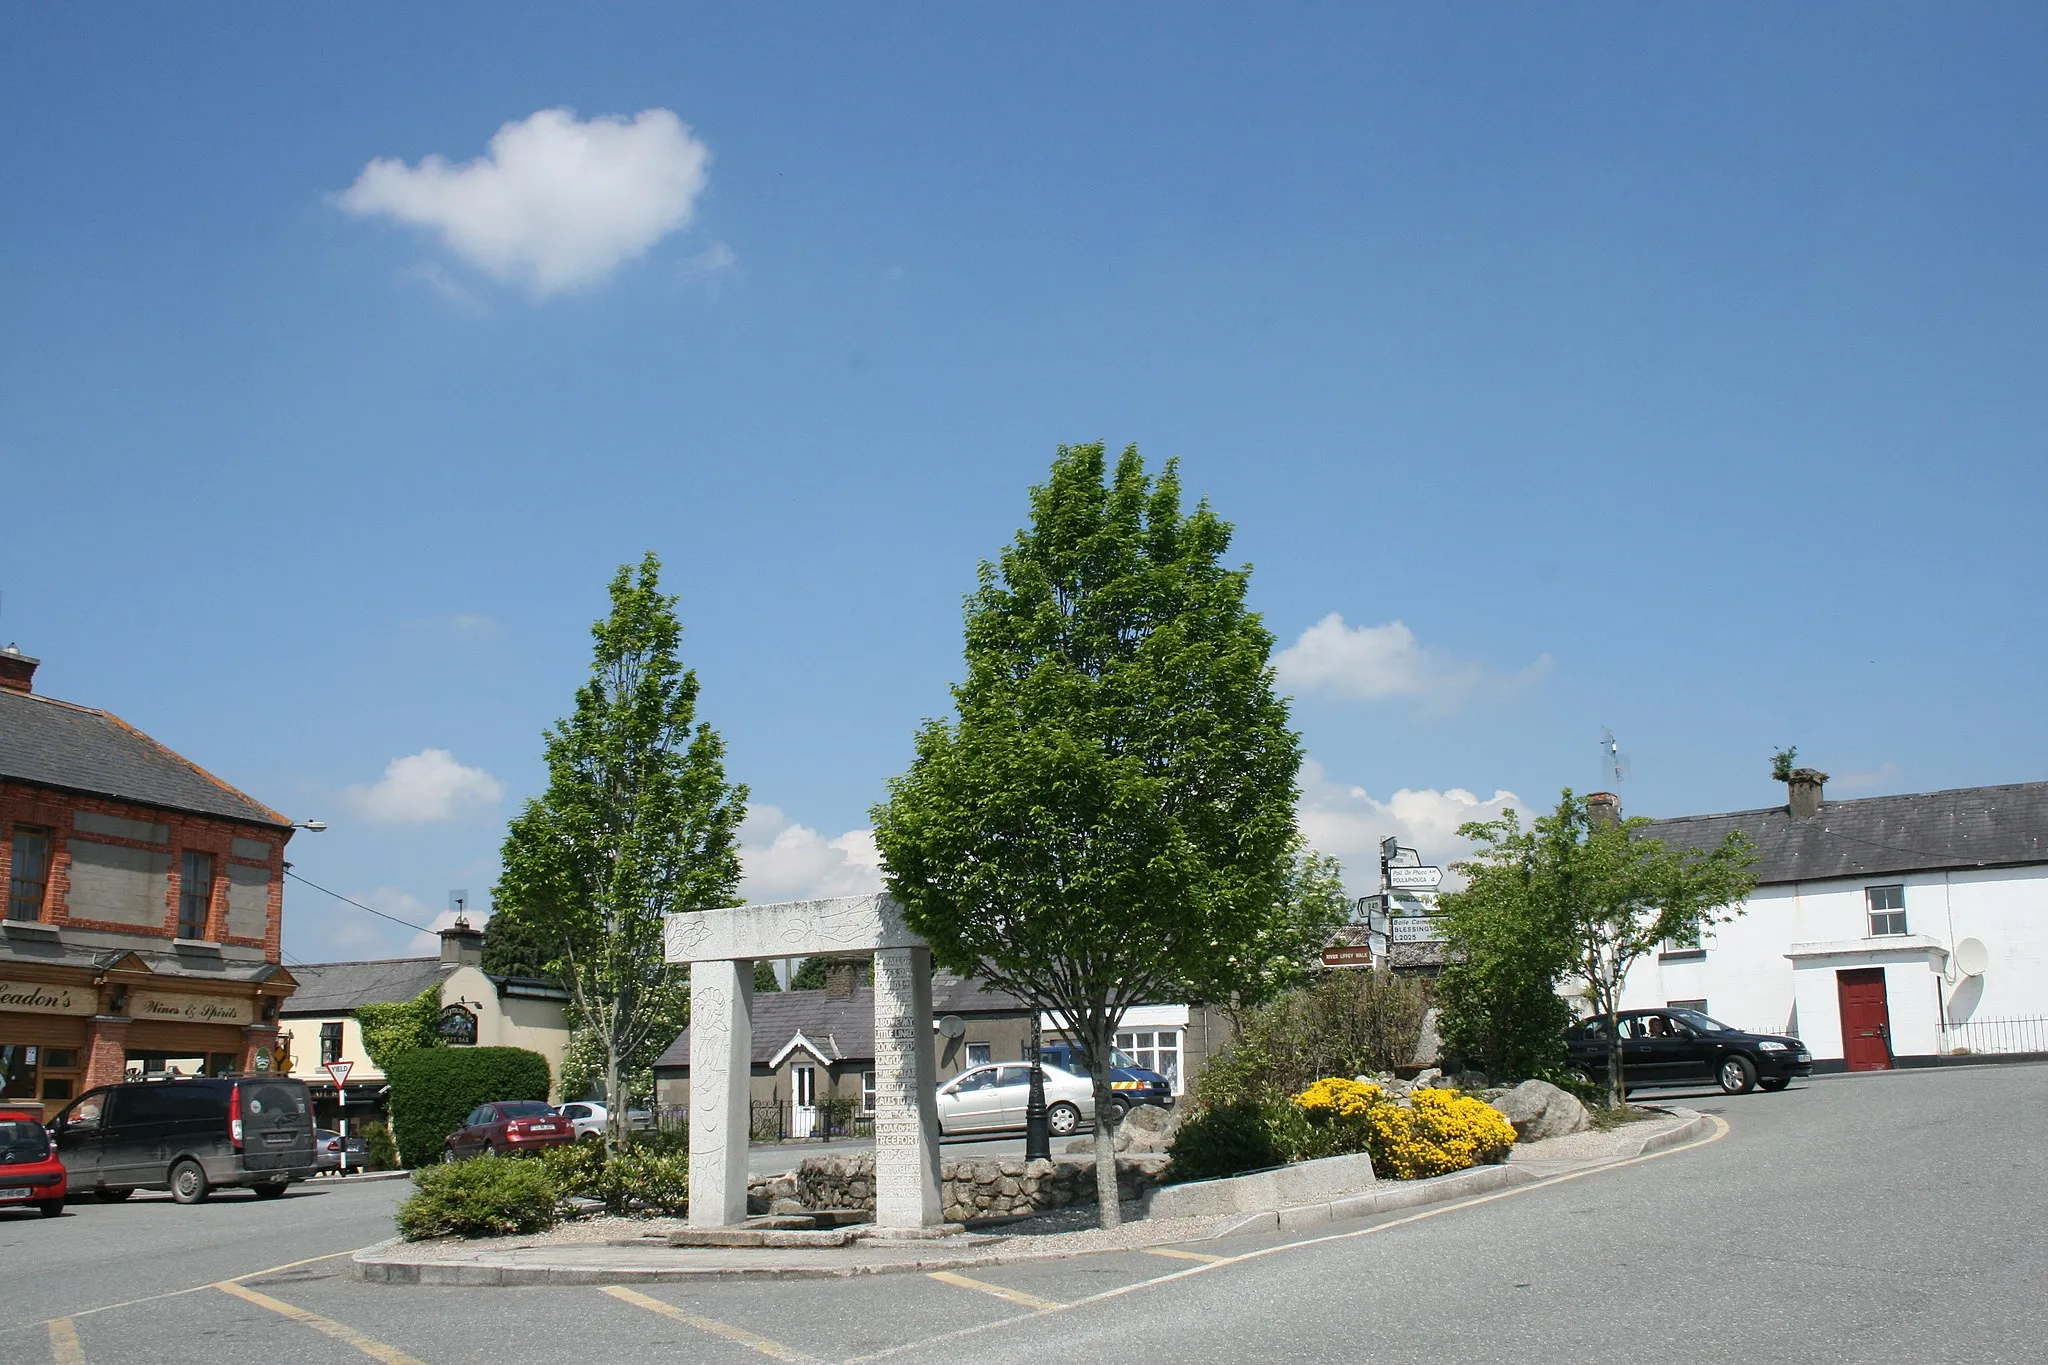 Photo showing: Ballymore Eustace, town centre